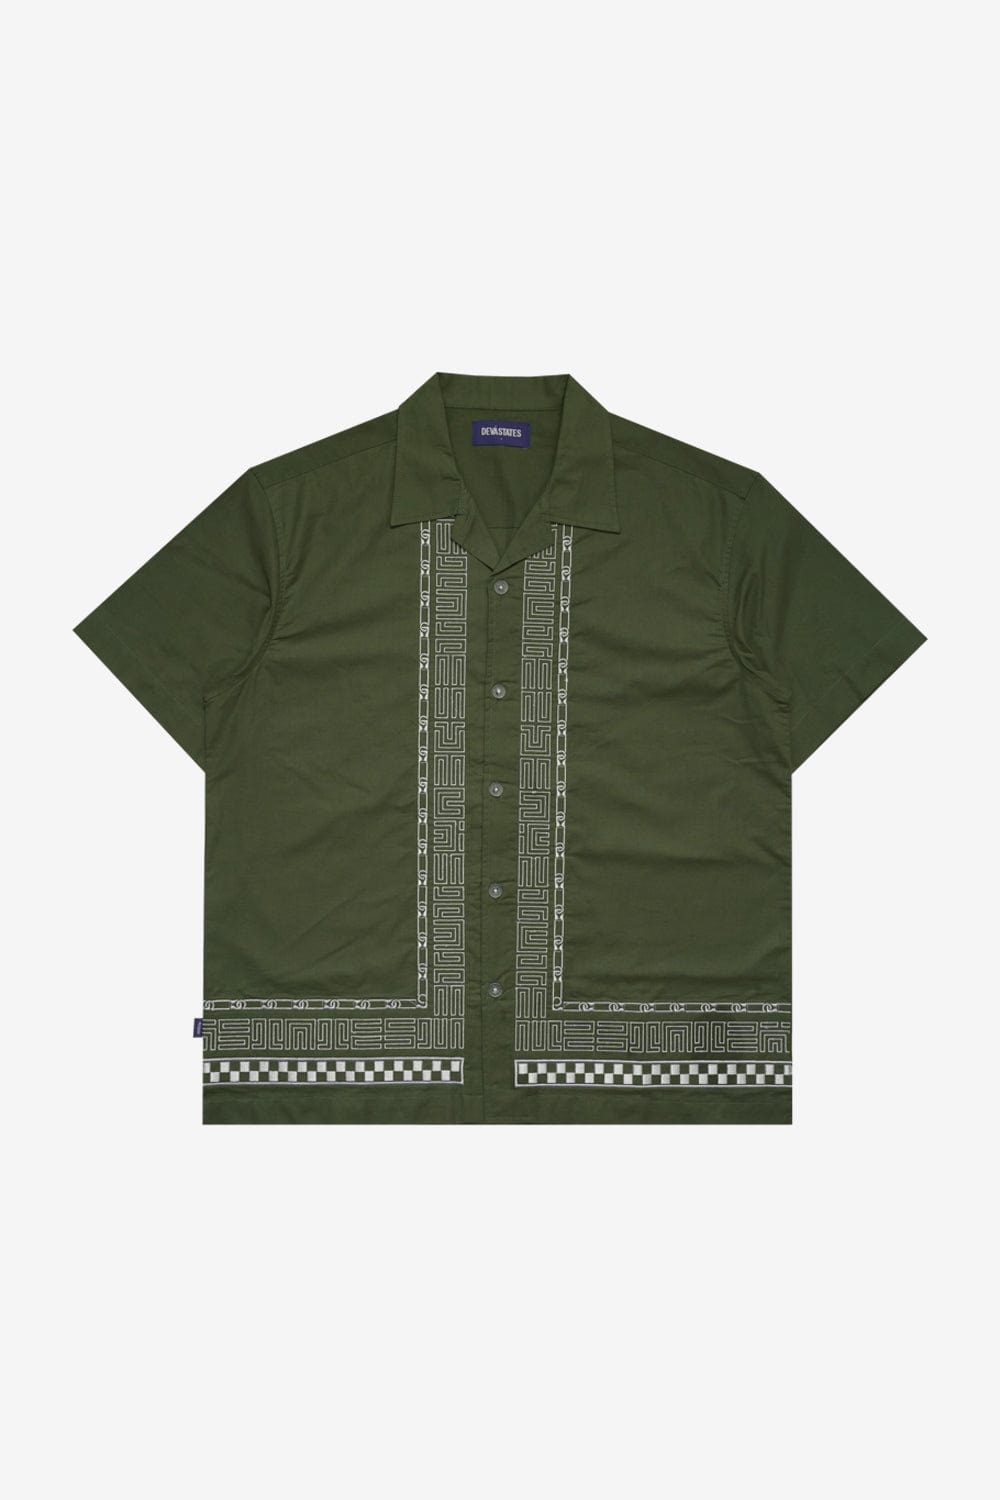 DEVA STATES Relic Embroidered Shirt (Olive Green)